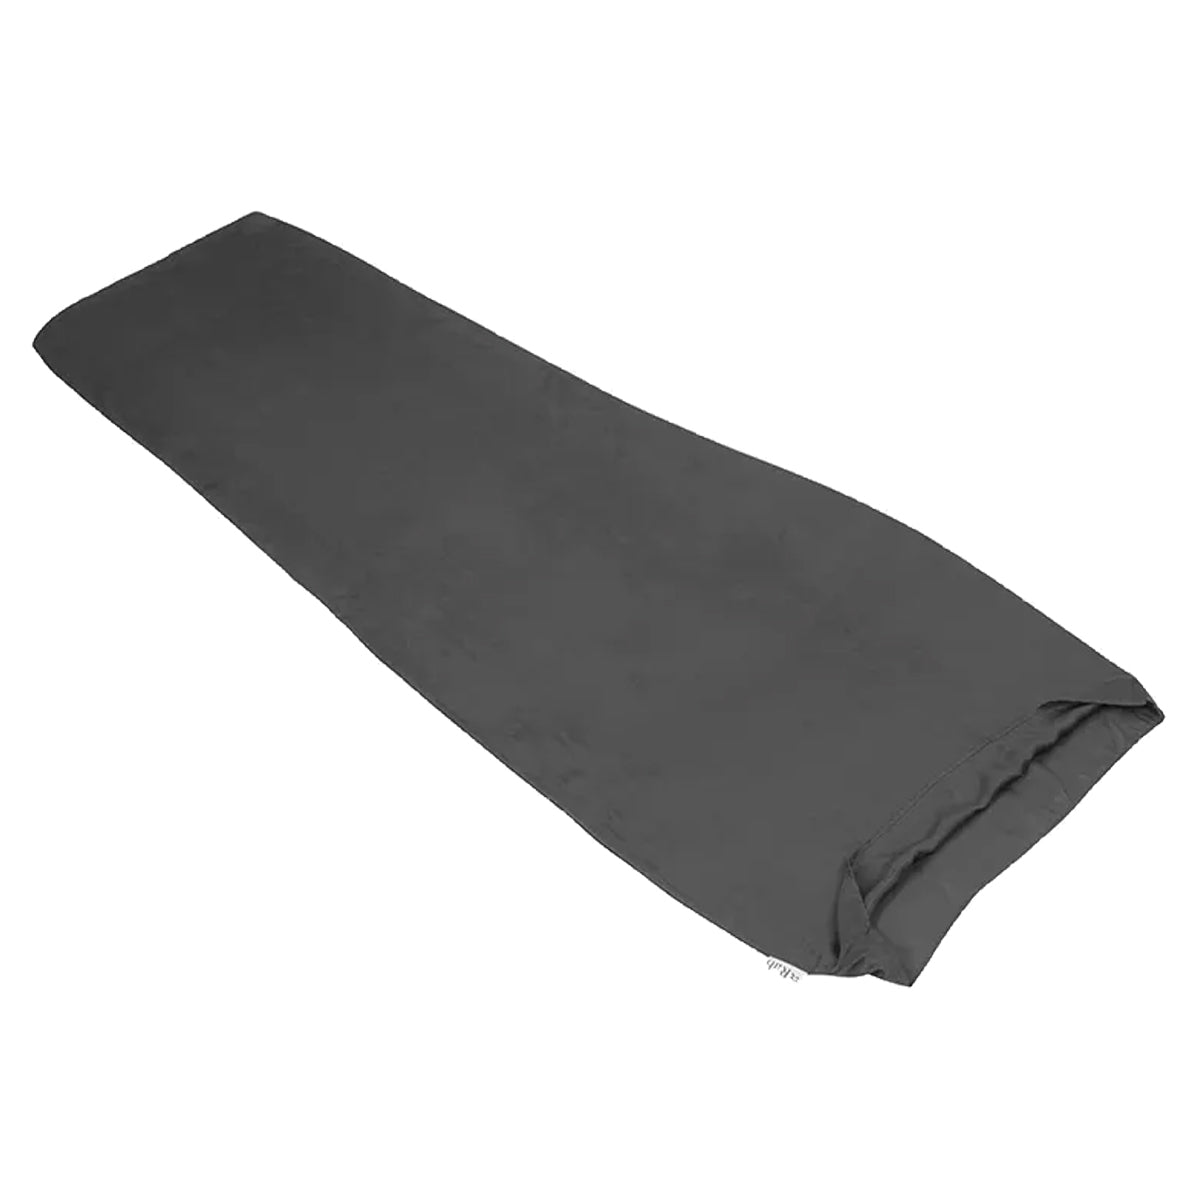 Rab Cotton Ascent Sleeping Bag Liner in  by GOHUNT | Rab - GOHUNT Shop